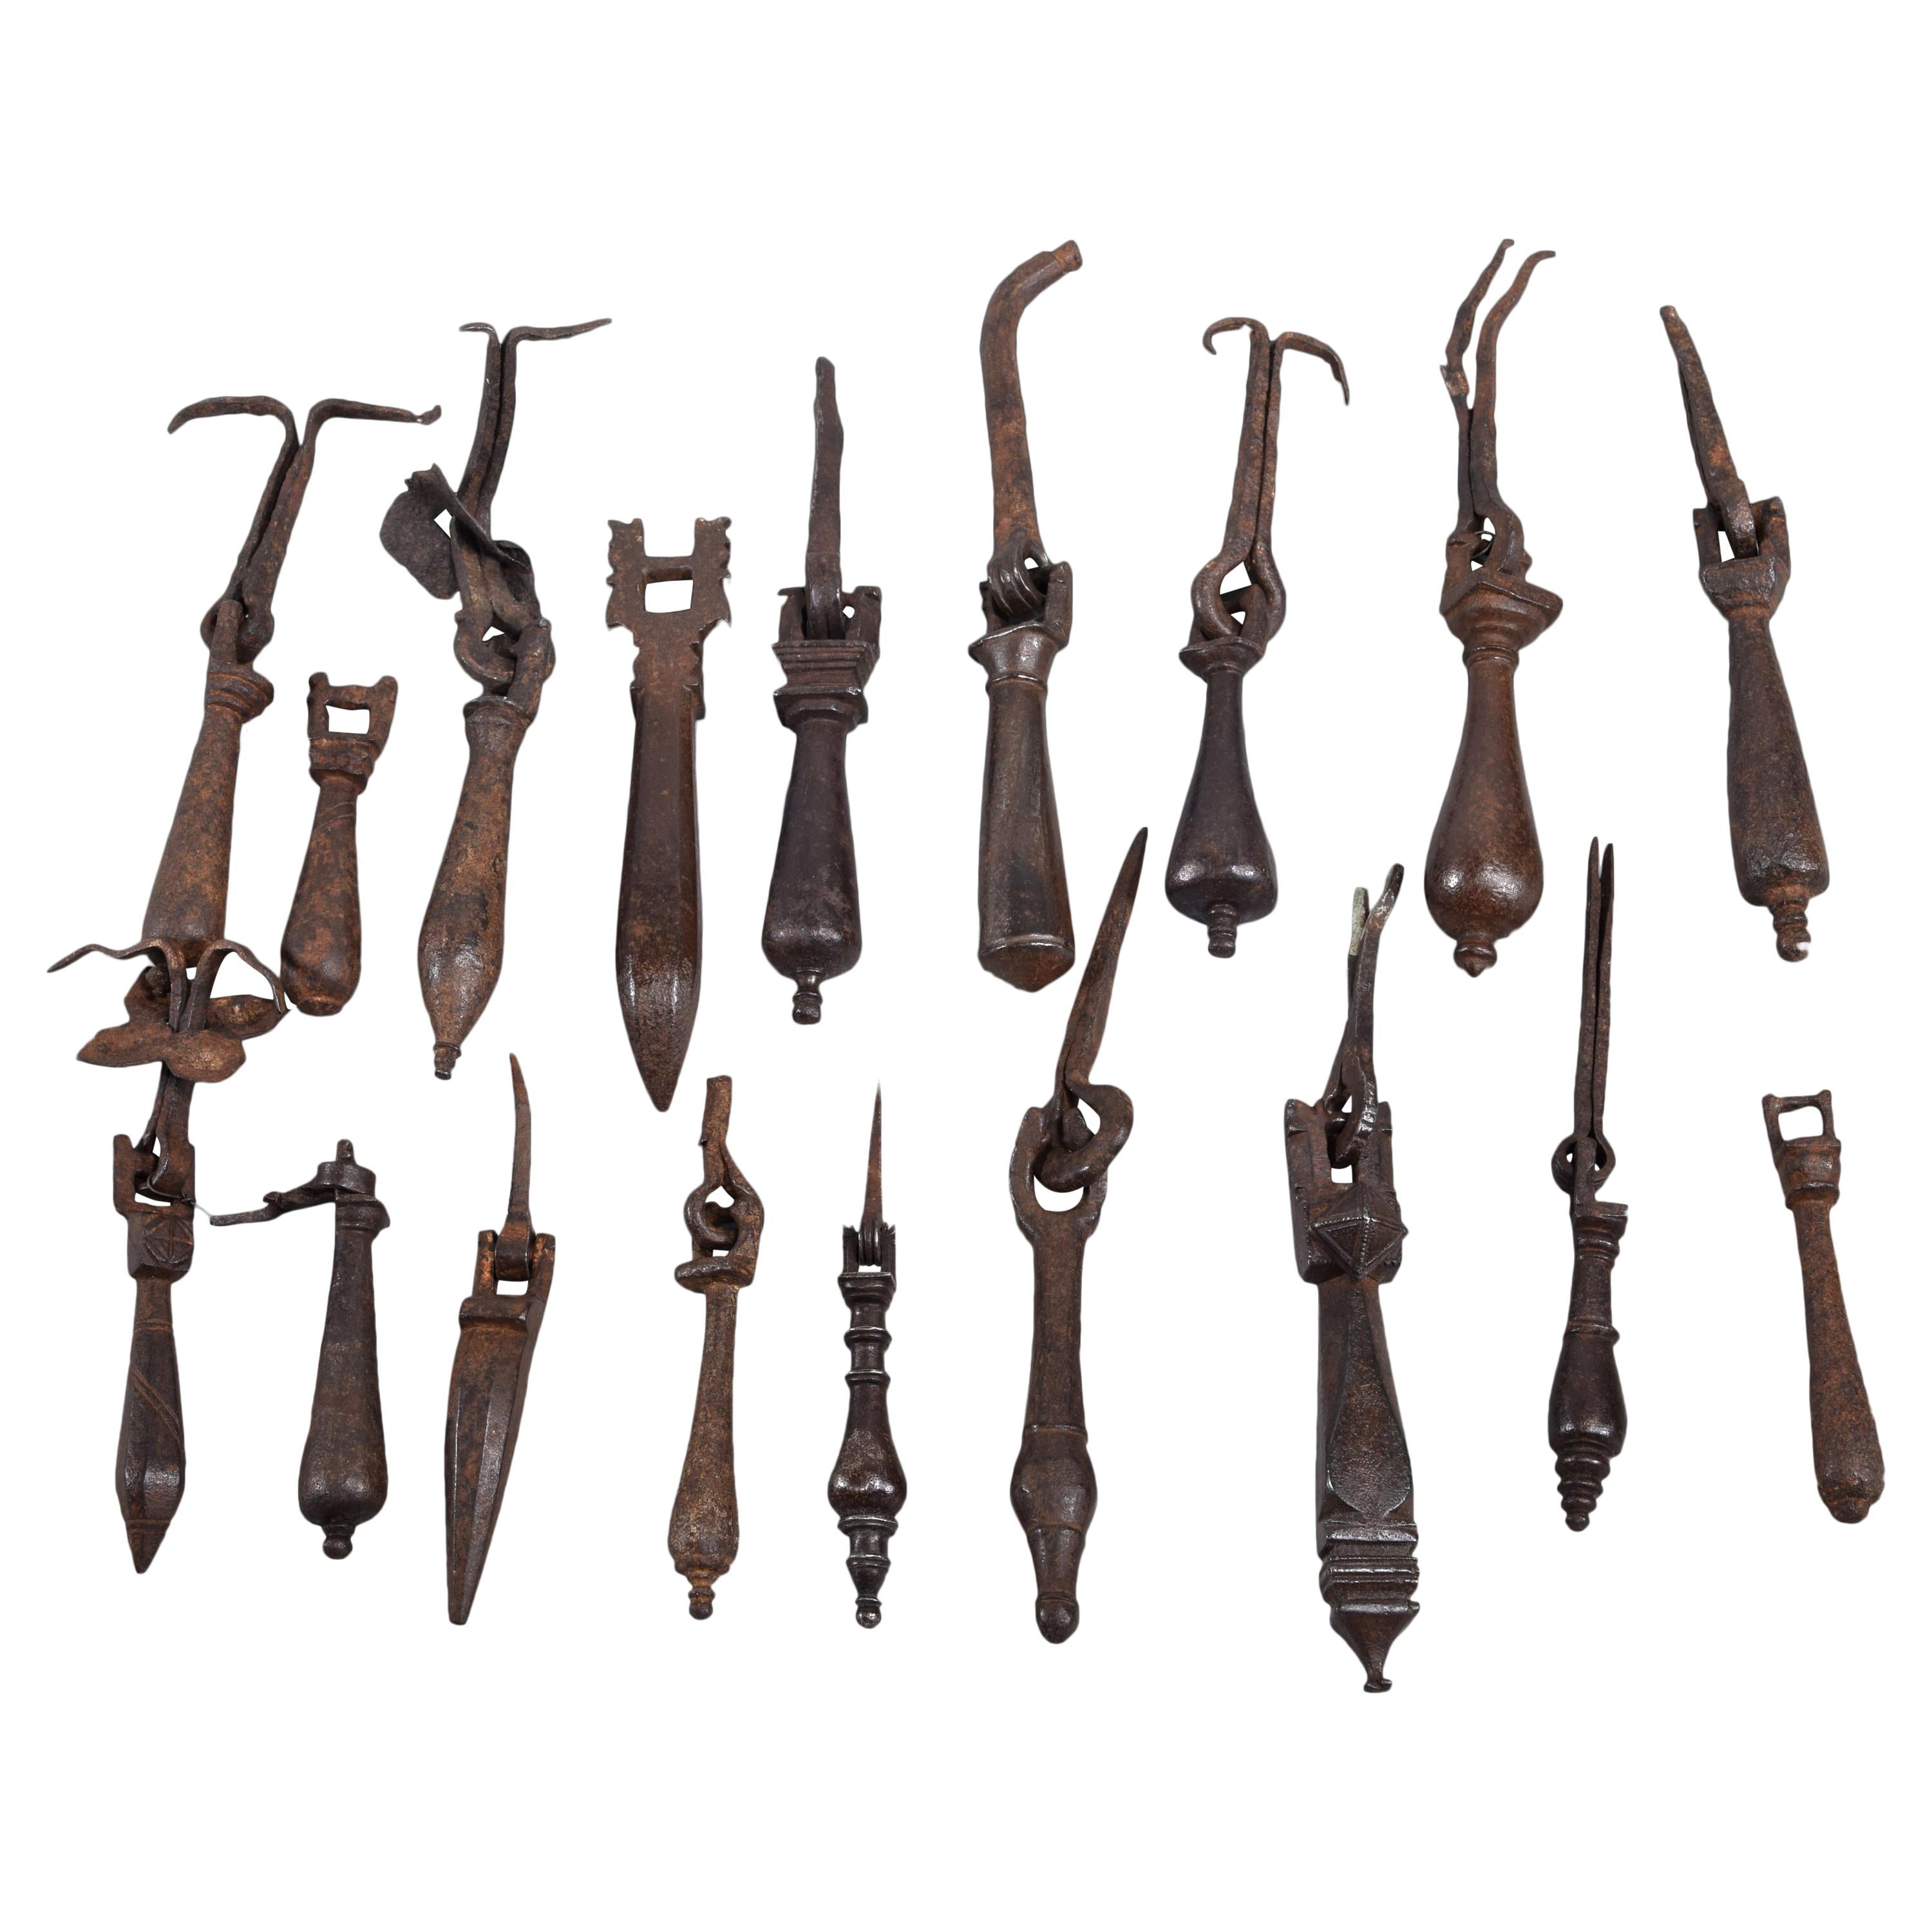 Wrought Iron Fittings Set '18 Units', 17th Century For Sale